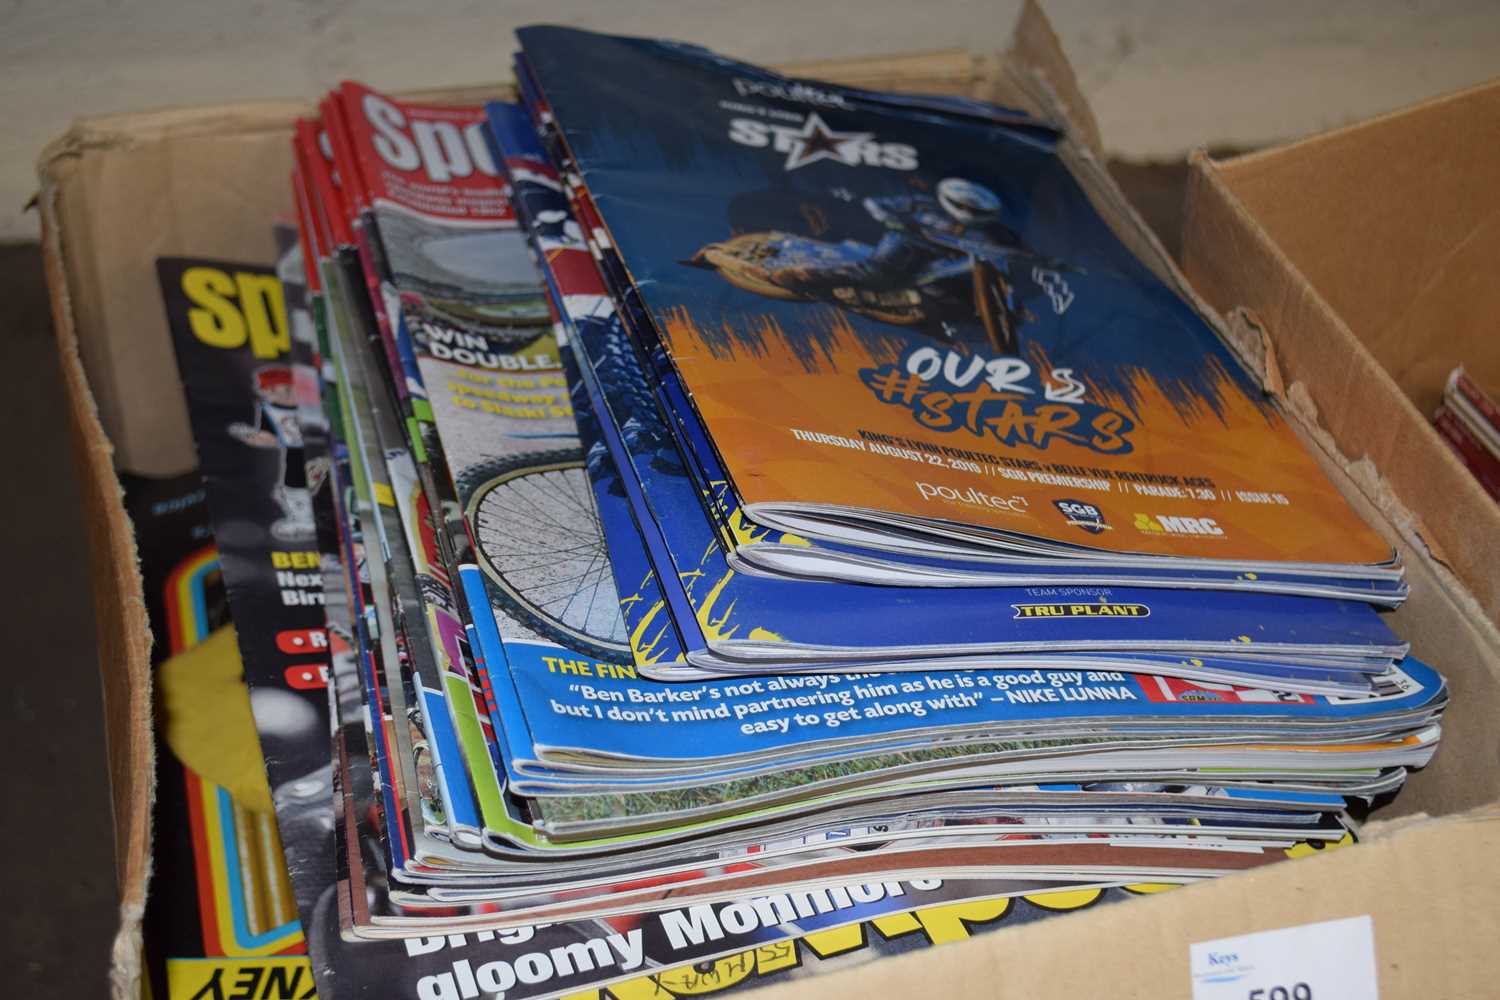 Speedway Star magazines and others similar